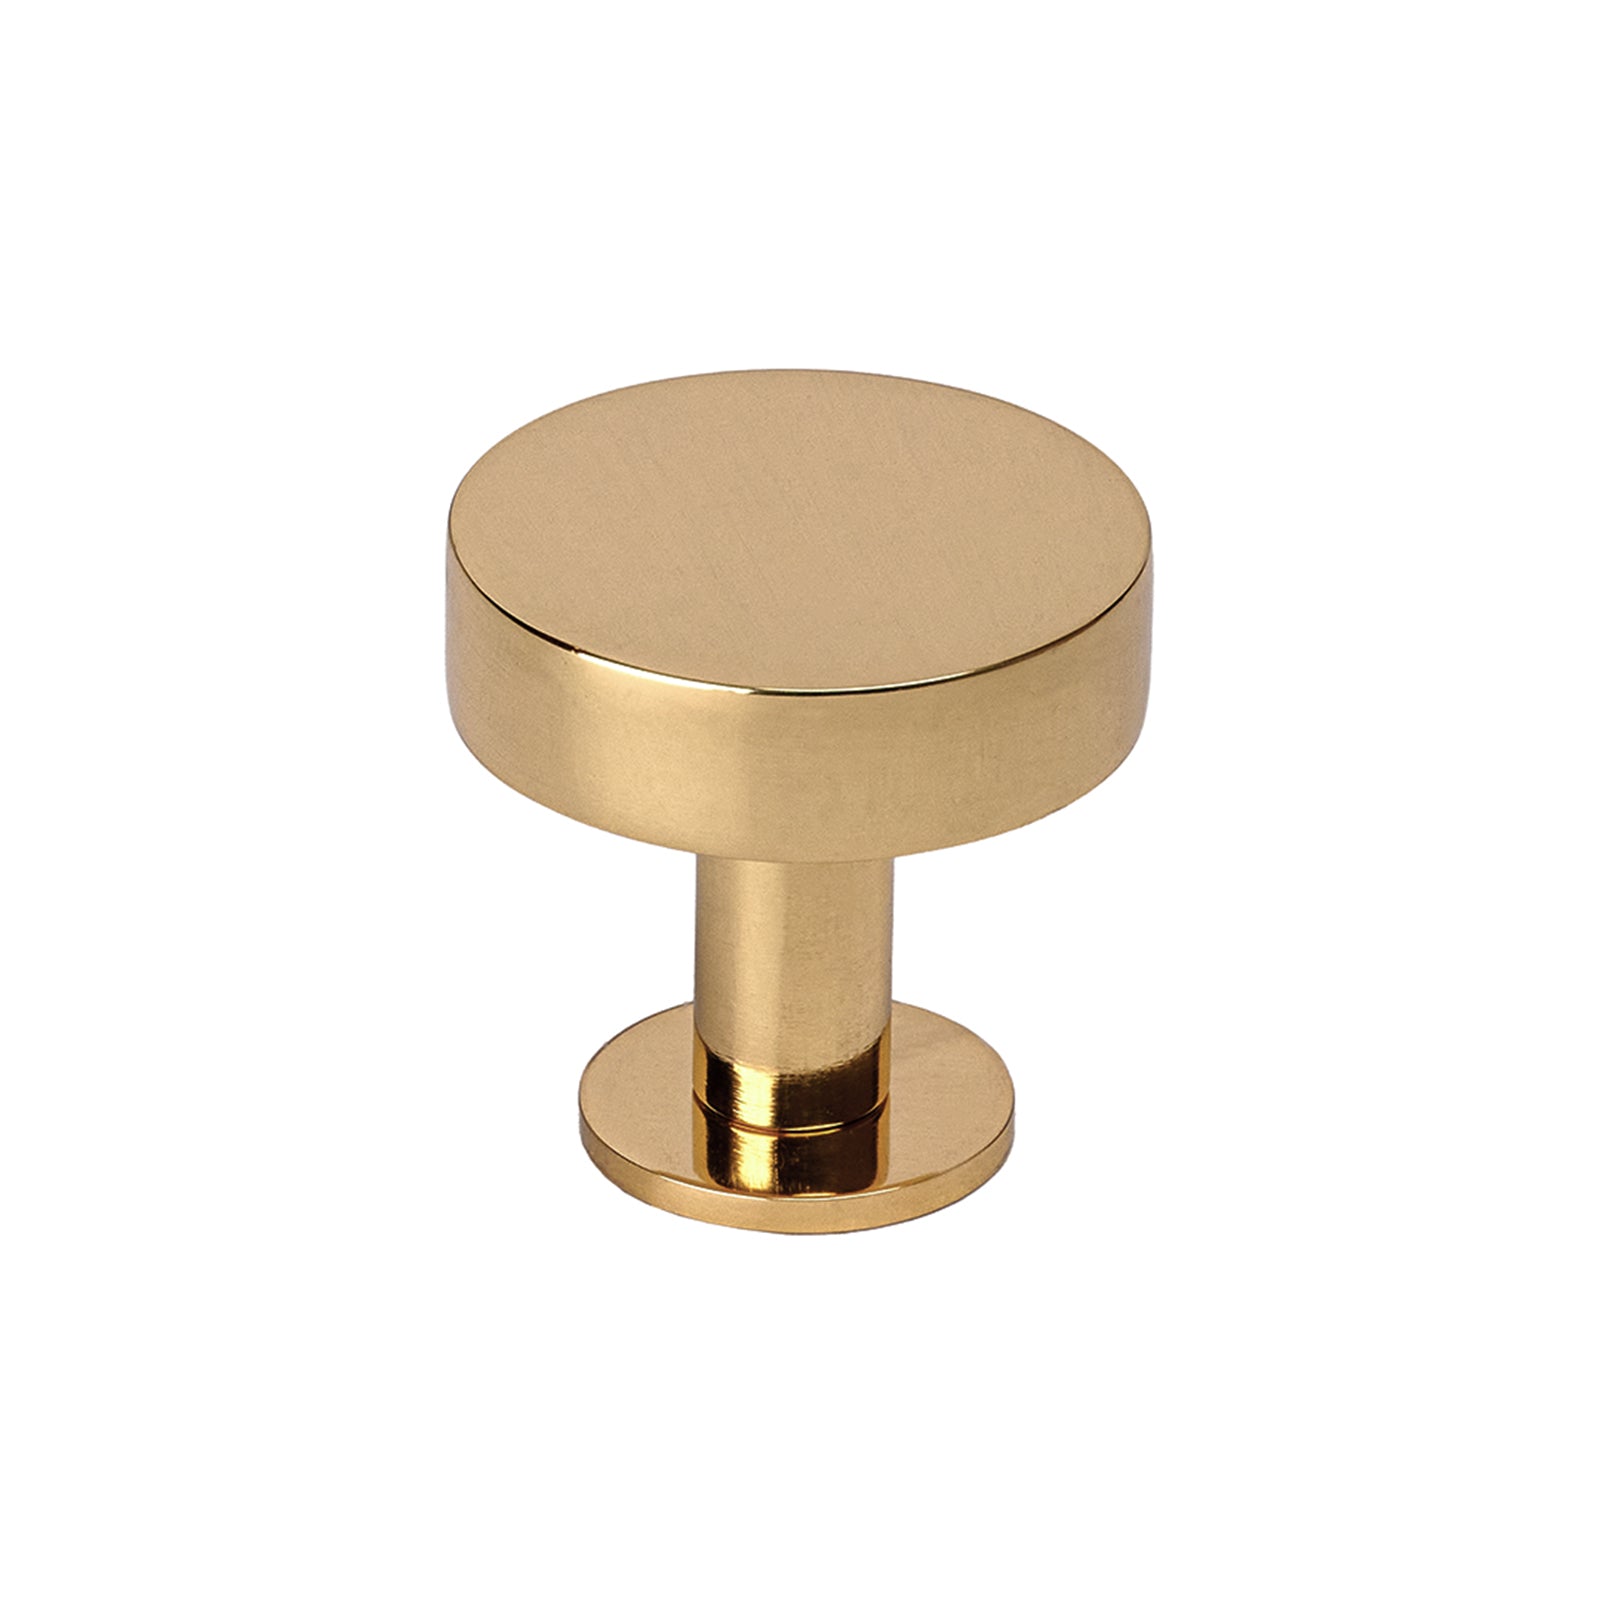  brass cabinet knobs on rose, kitchen cupboard knobs with roseplate SHOW